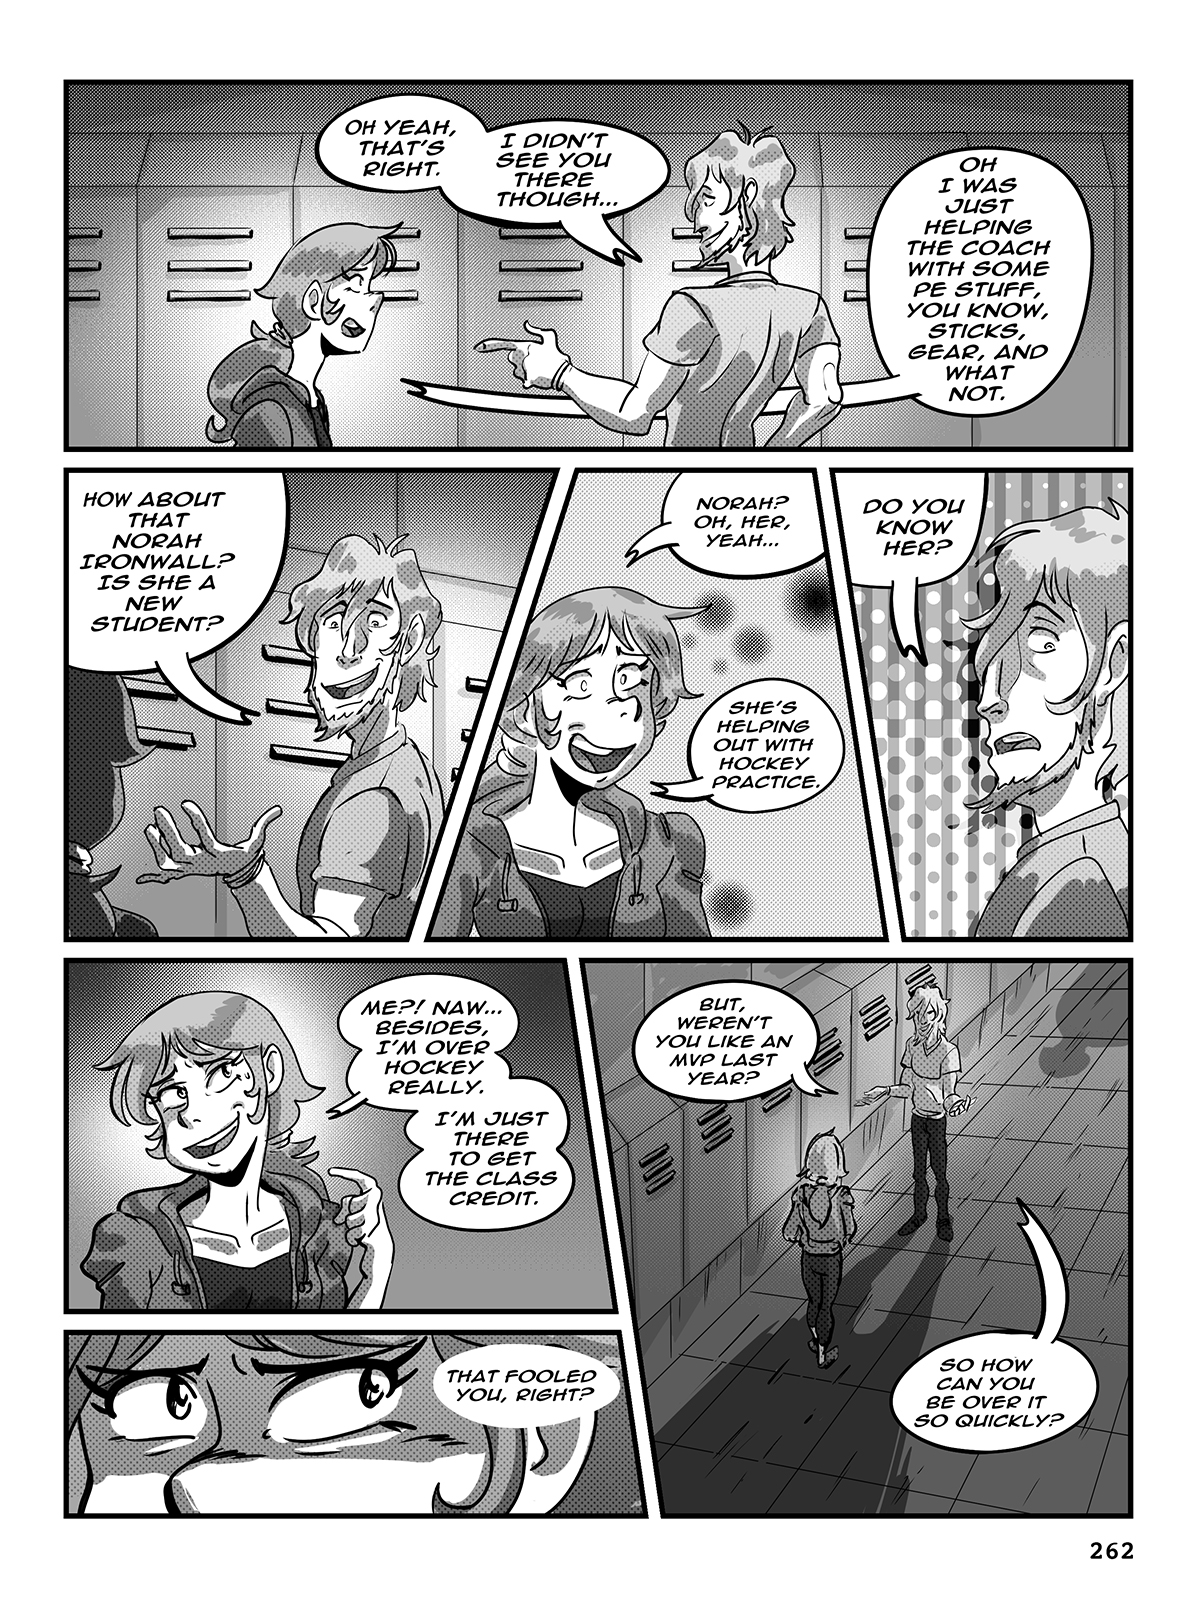 Hockey, Love, & GUTS! – Chapter 9 – Page 262